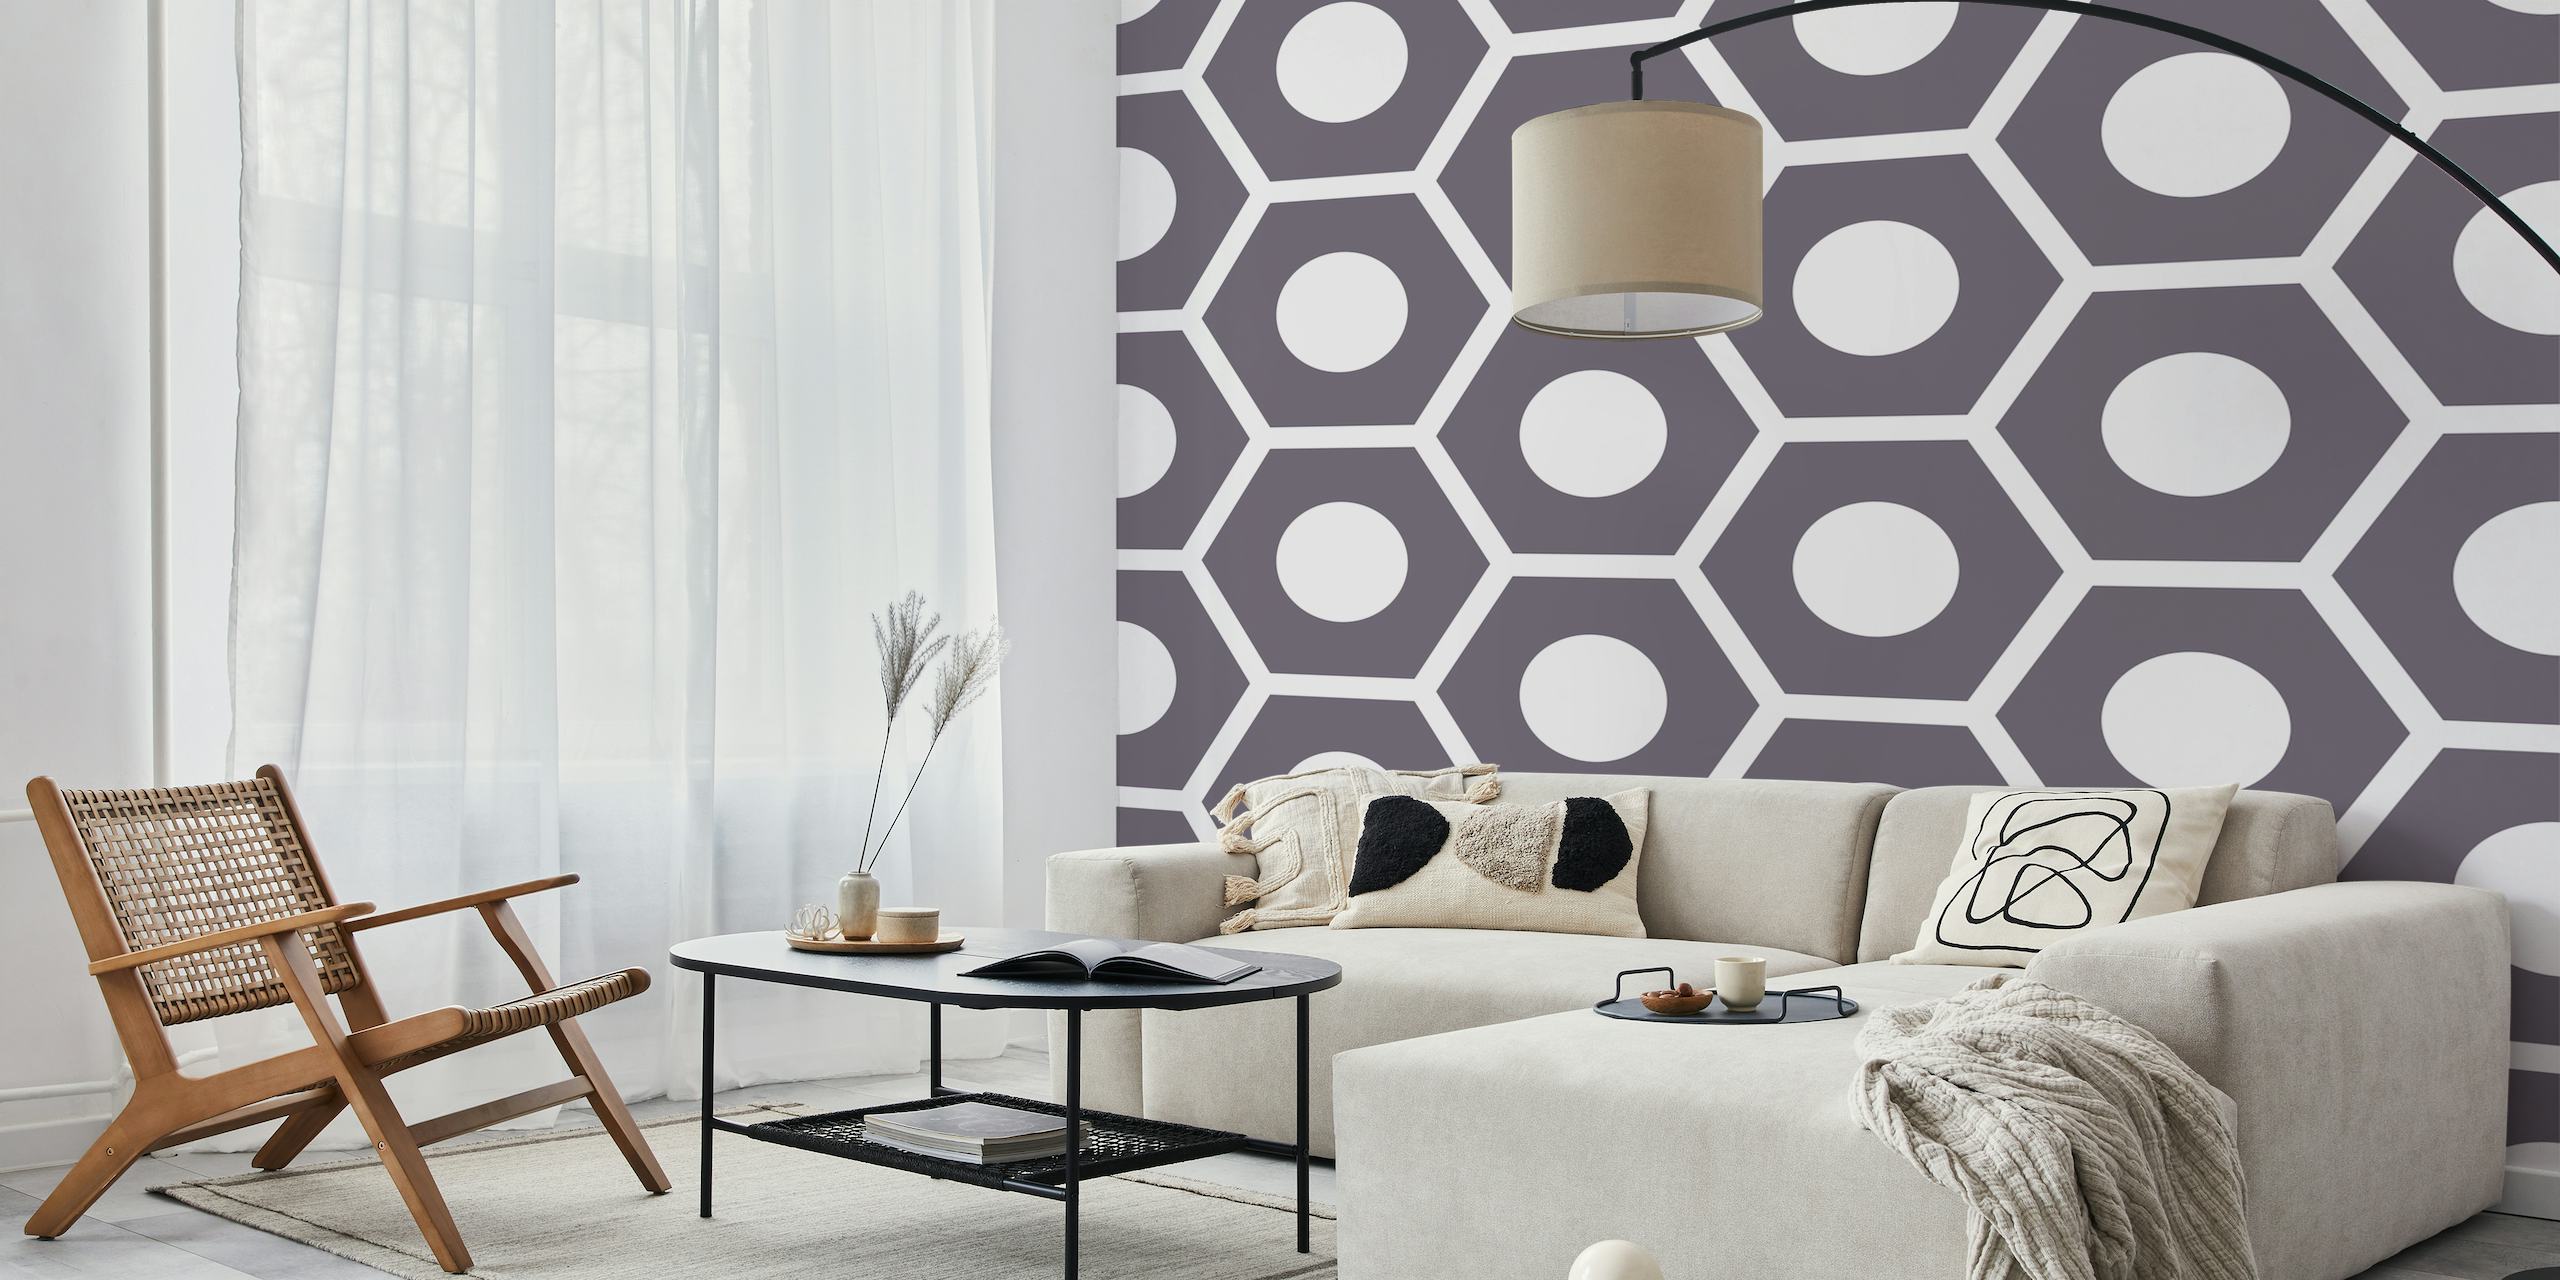 Bicolor Hexagon Pattern wall mural with grey and white geometric design.